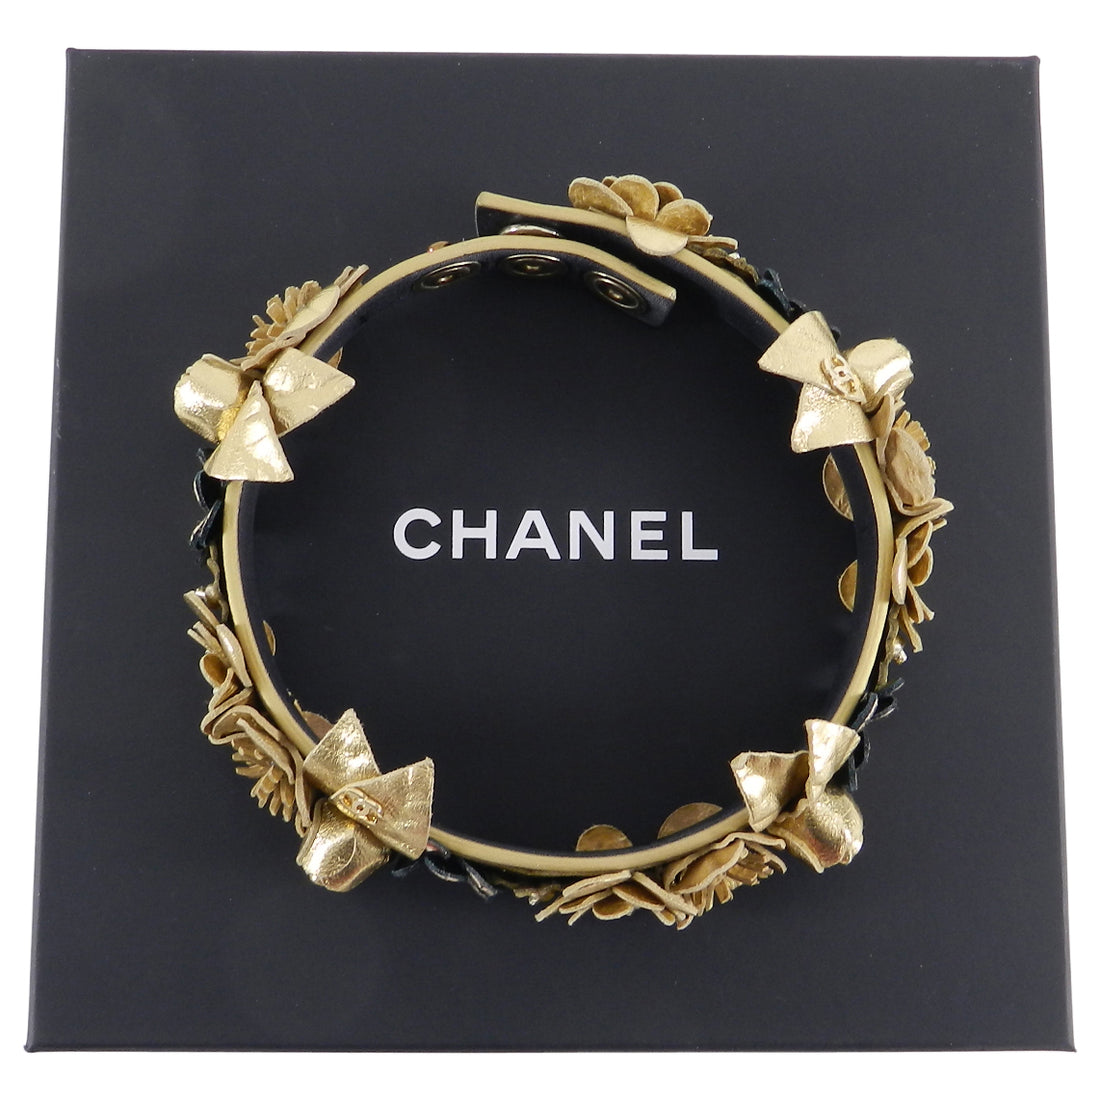 Chanel Mini Gold - 388 For Sale on 1stDibs